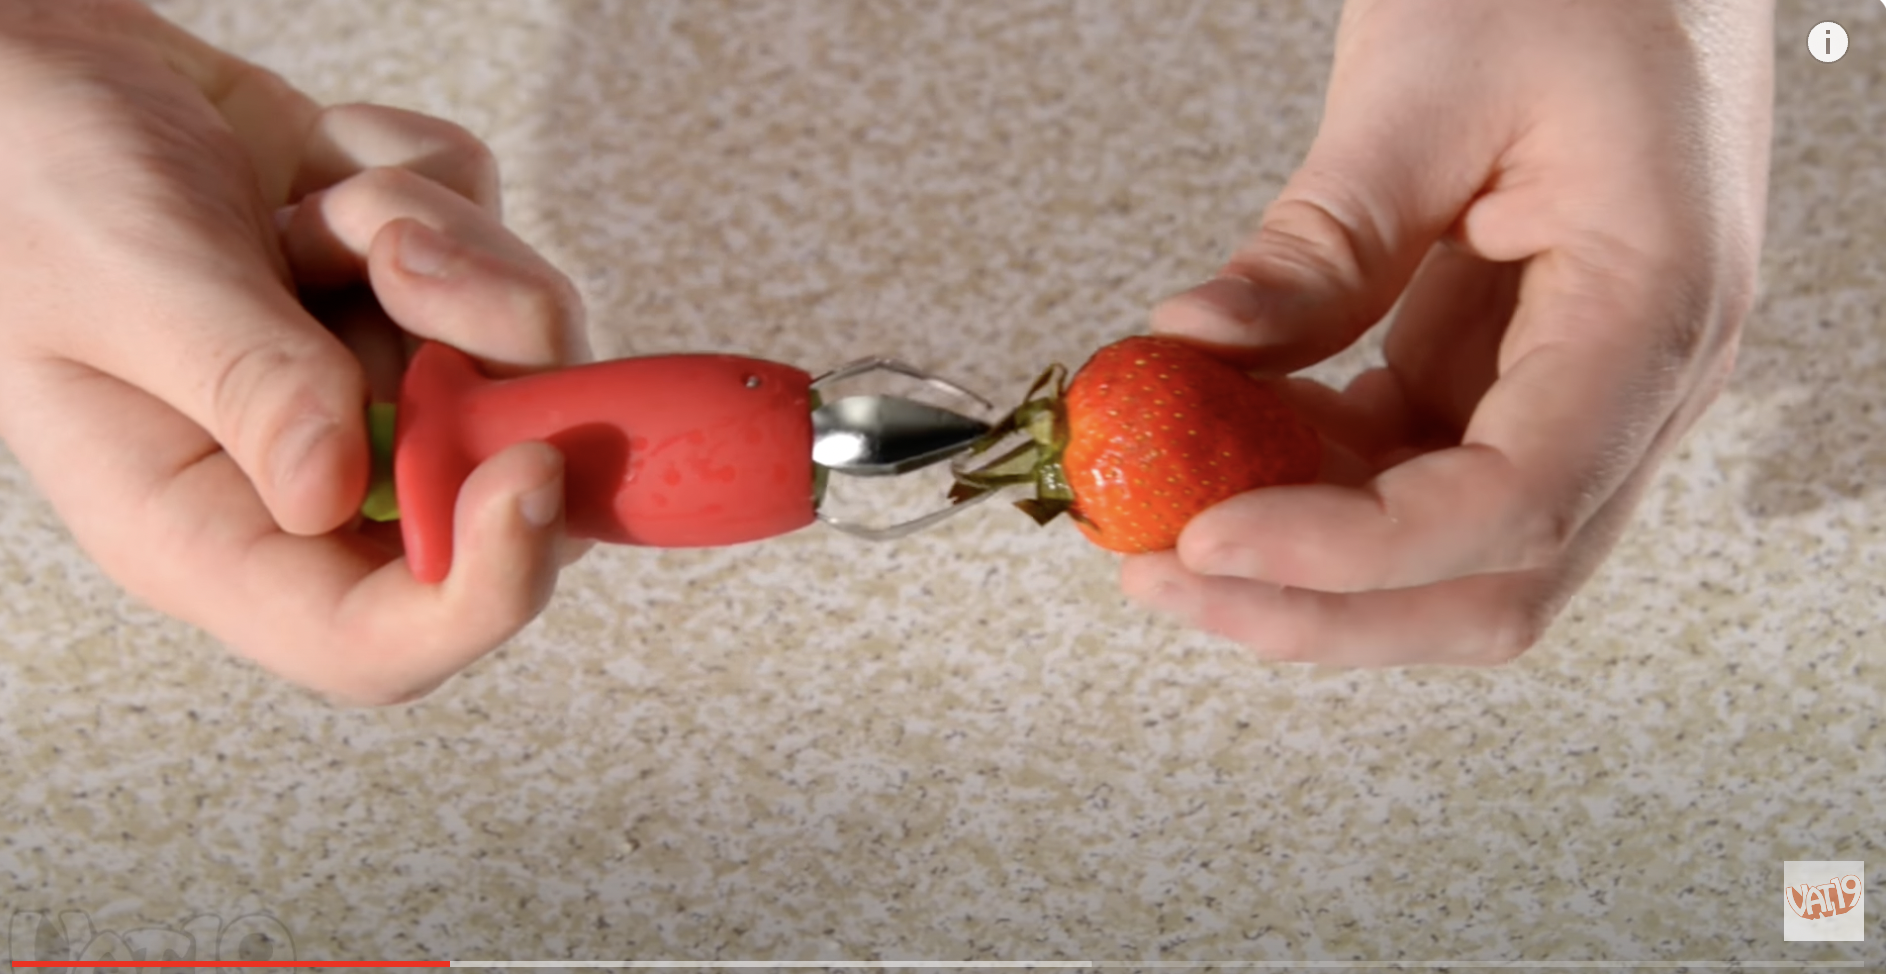 A stem remover removing a strawberry's stem. | Source: Youtube/Vat19